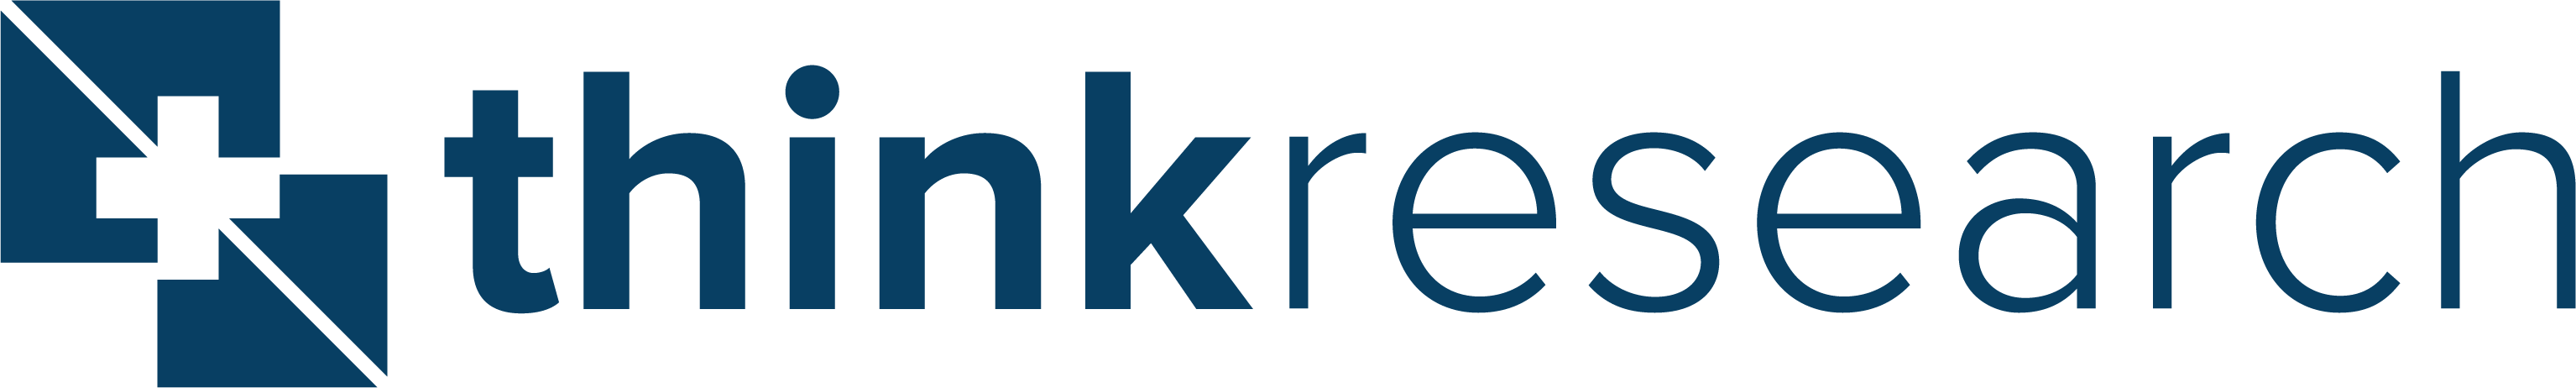 think research logo